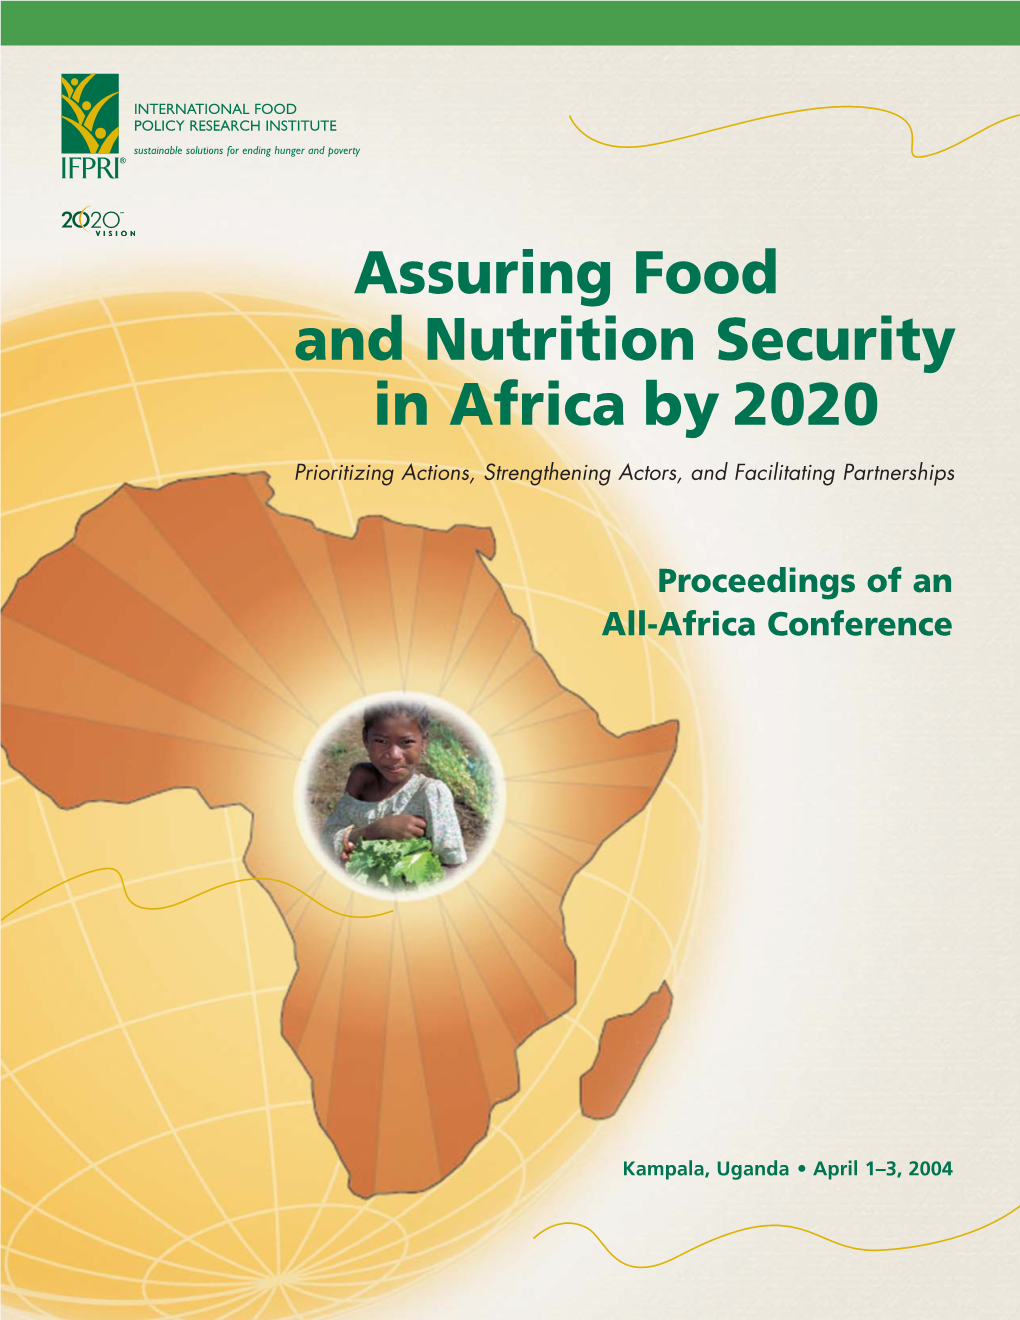 Assuring Food and Nutrition Security in Africa by 2020